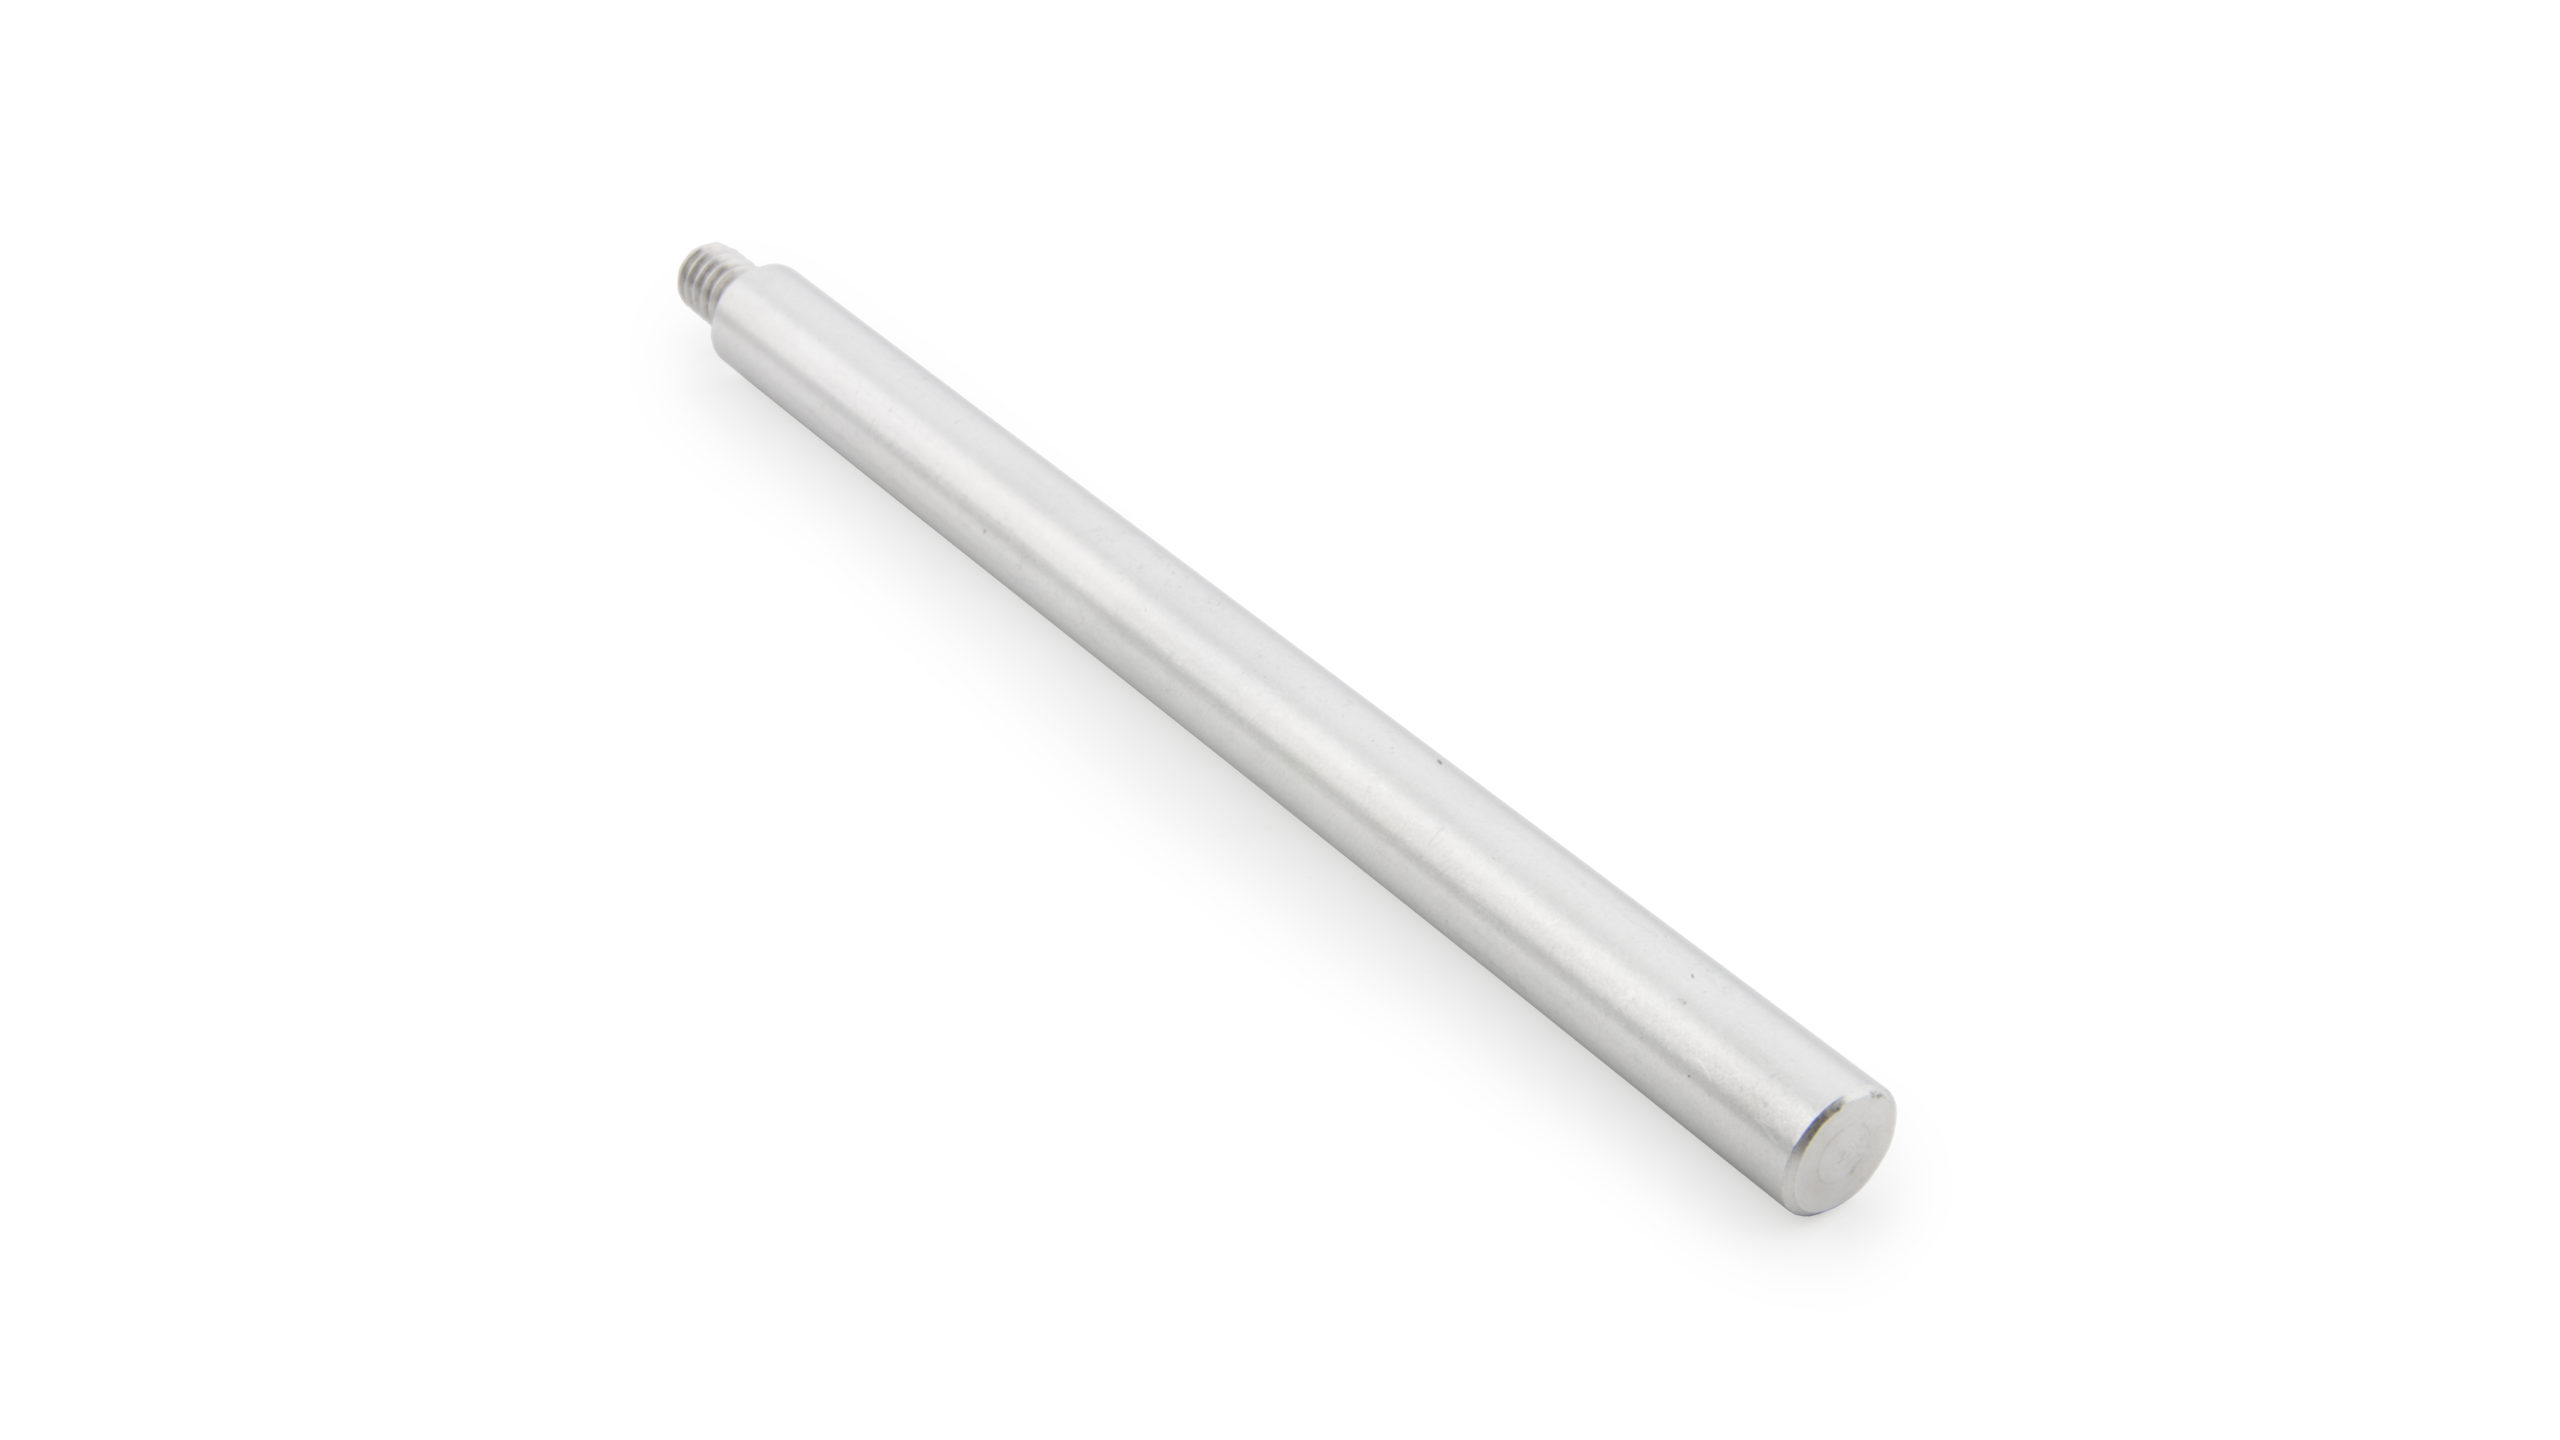 Replacement Rod, 5 inch - Vernier